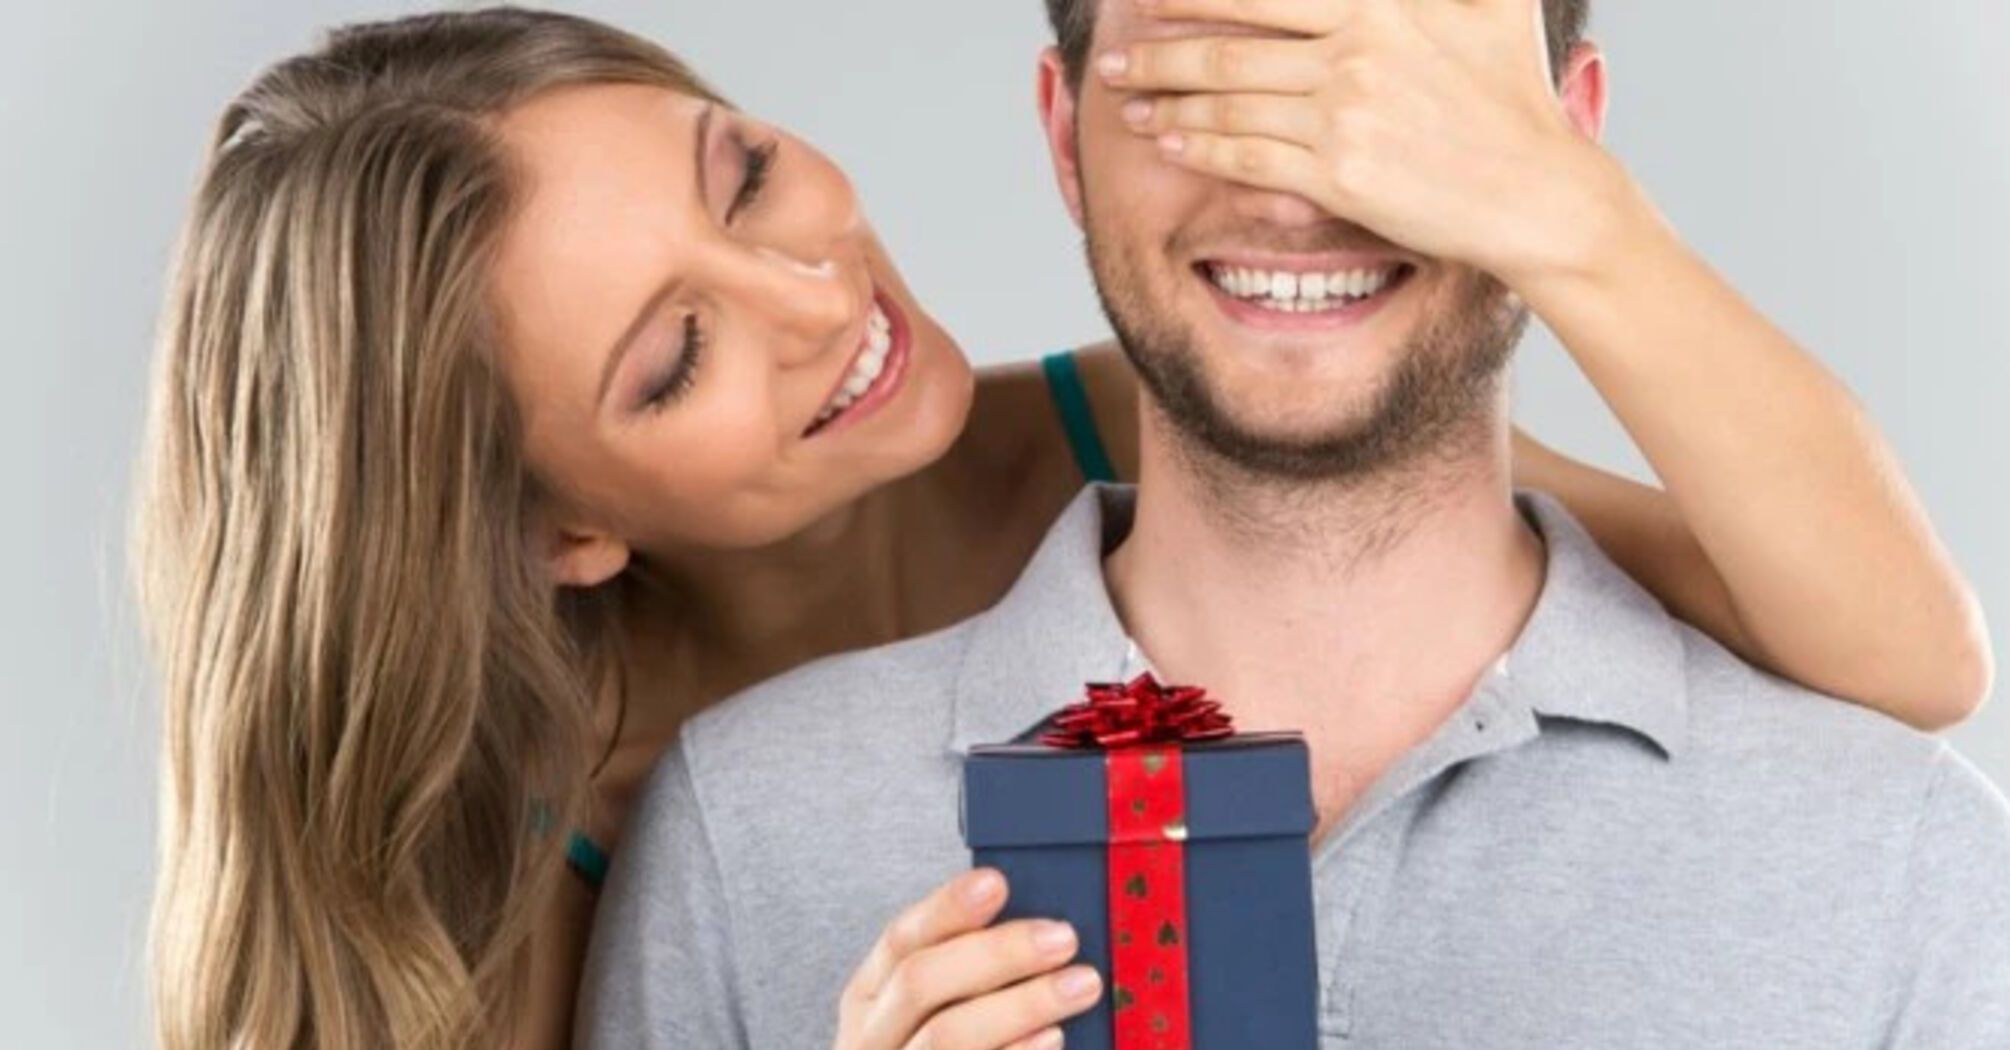 How to find the perfect gift for a man